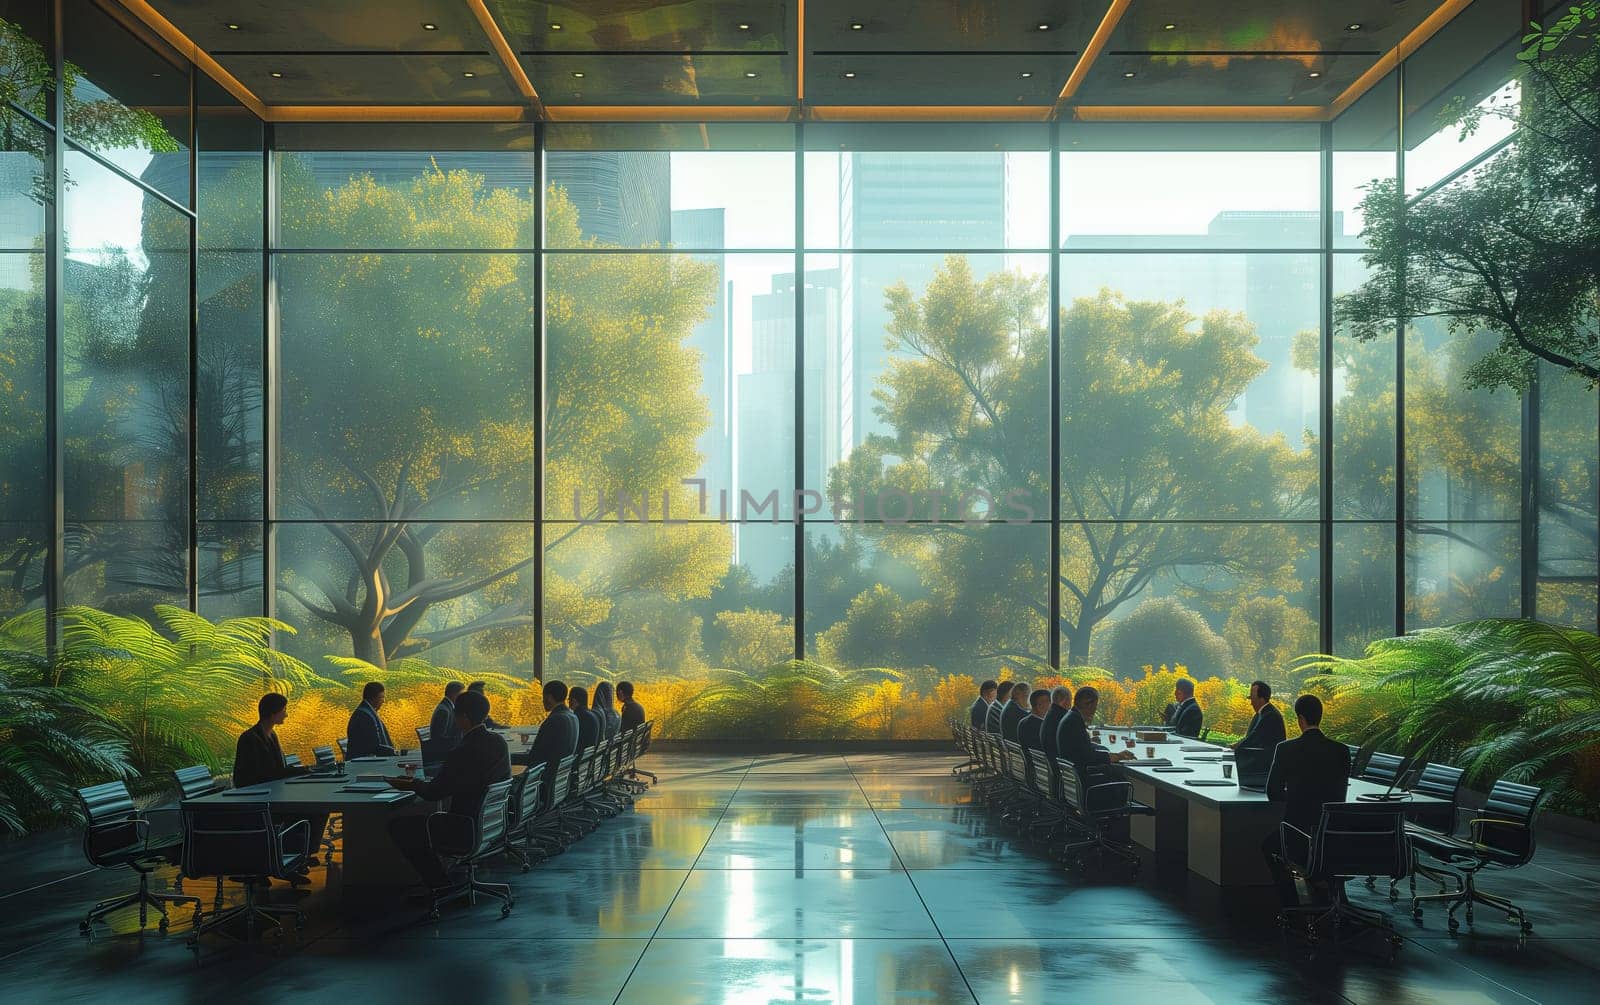 A group of individuals are gathered in a conference room with long tables, surrounded by building facade, glass walls, and artistic decor